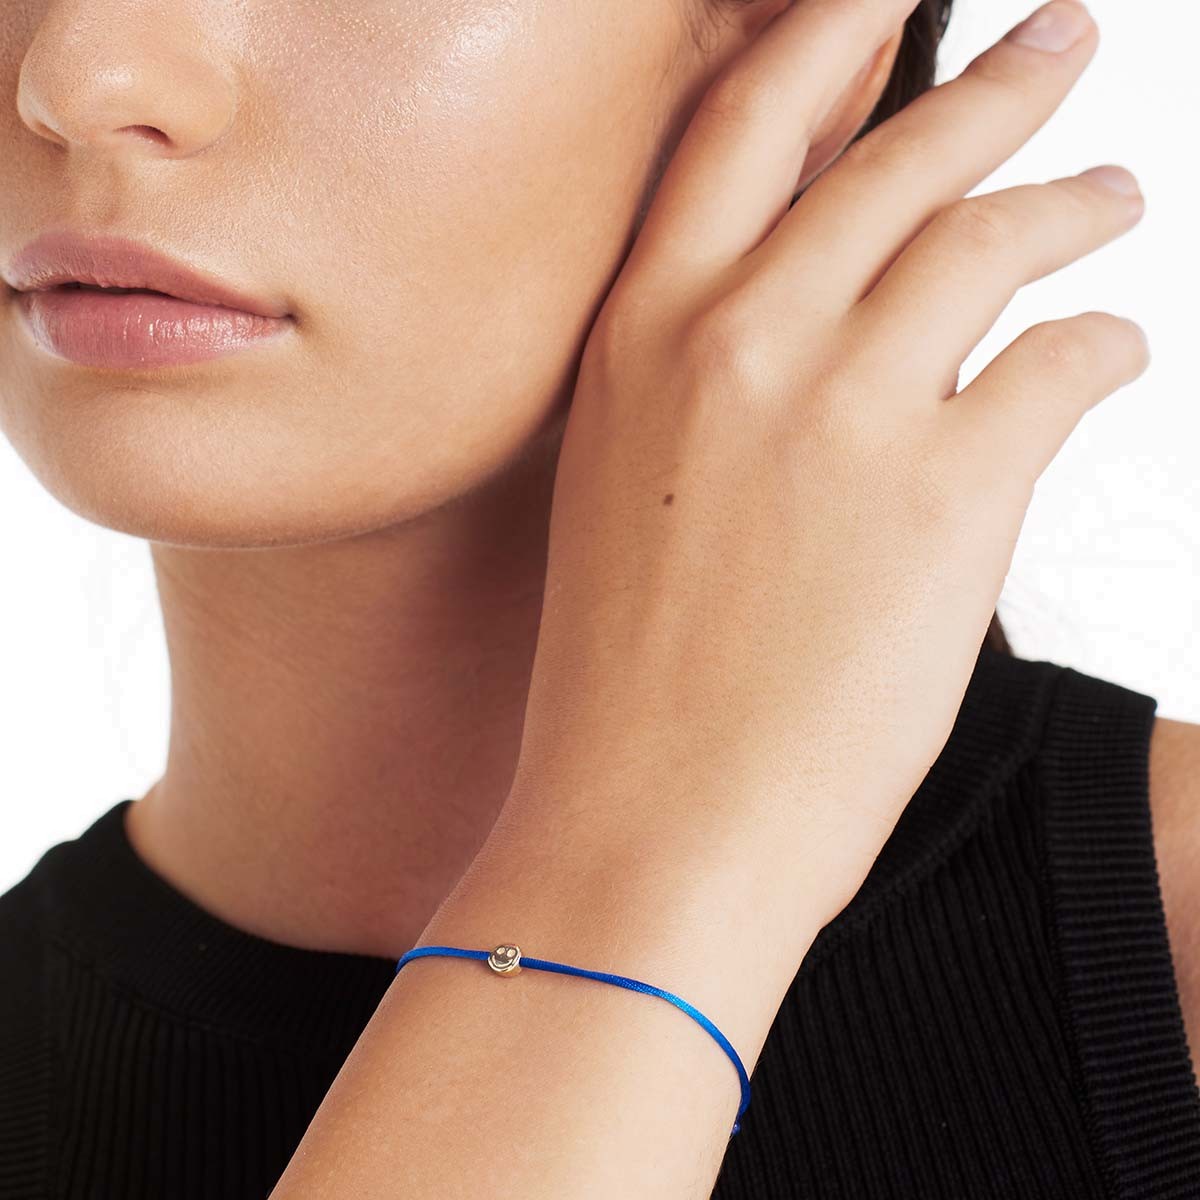 The Golden One royal blue - Armband - 14k Gold